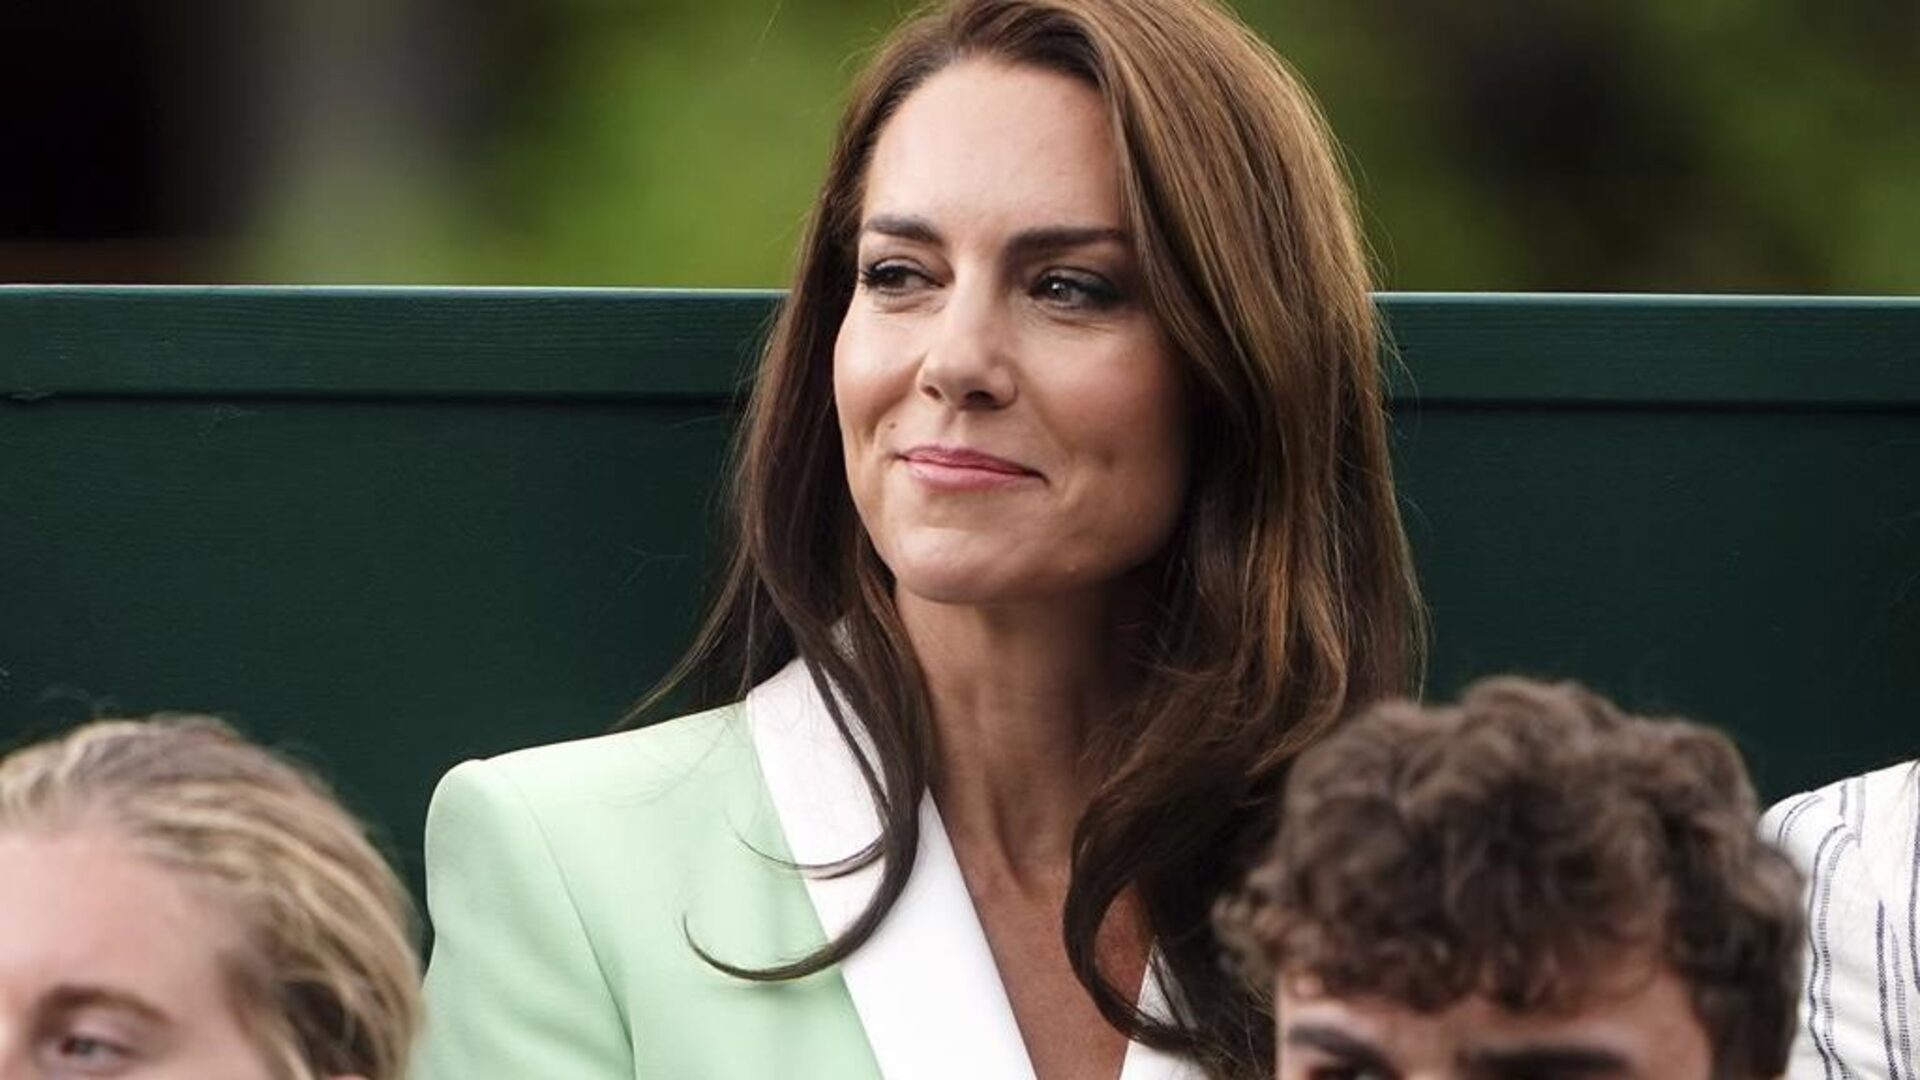 How will Princess Kate's cancer diagnosis impact the Royal Family?